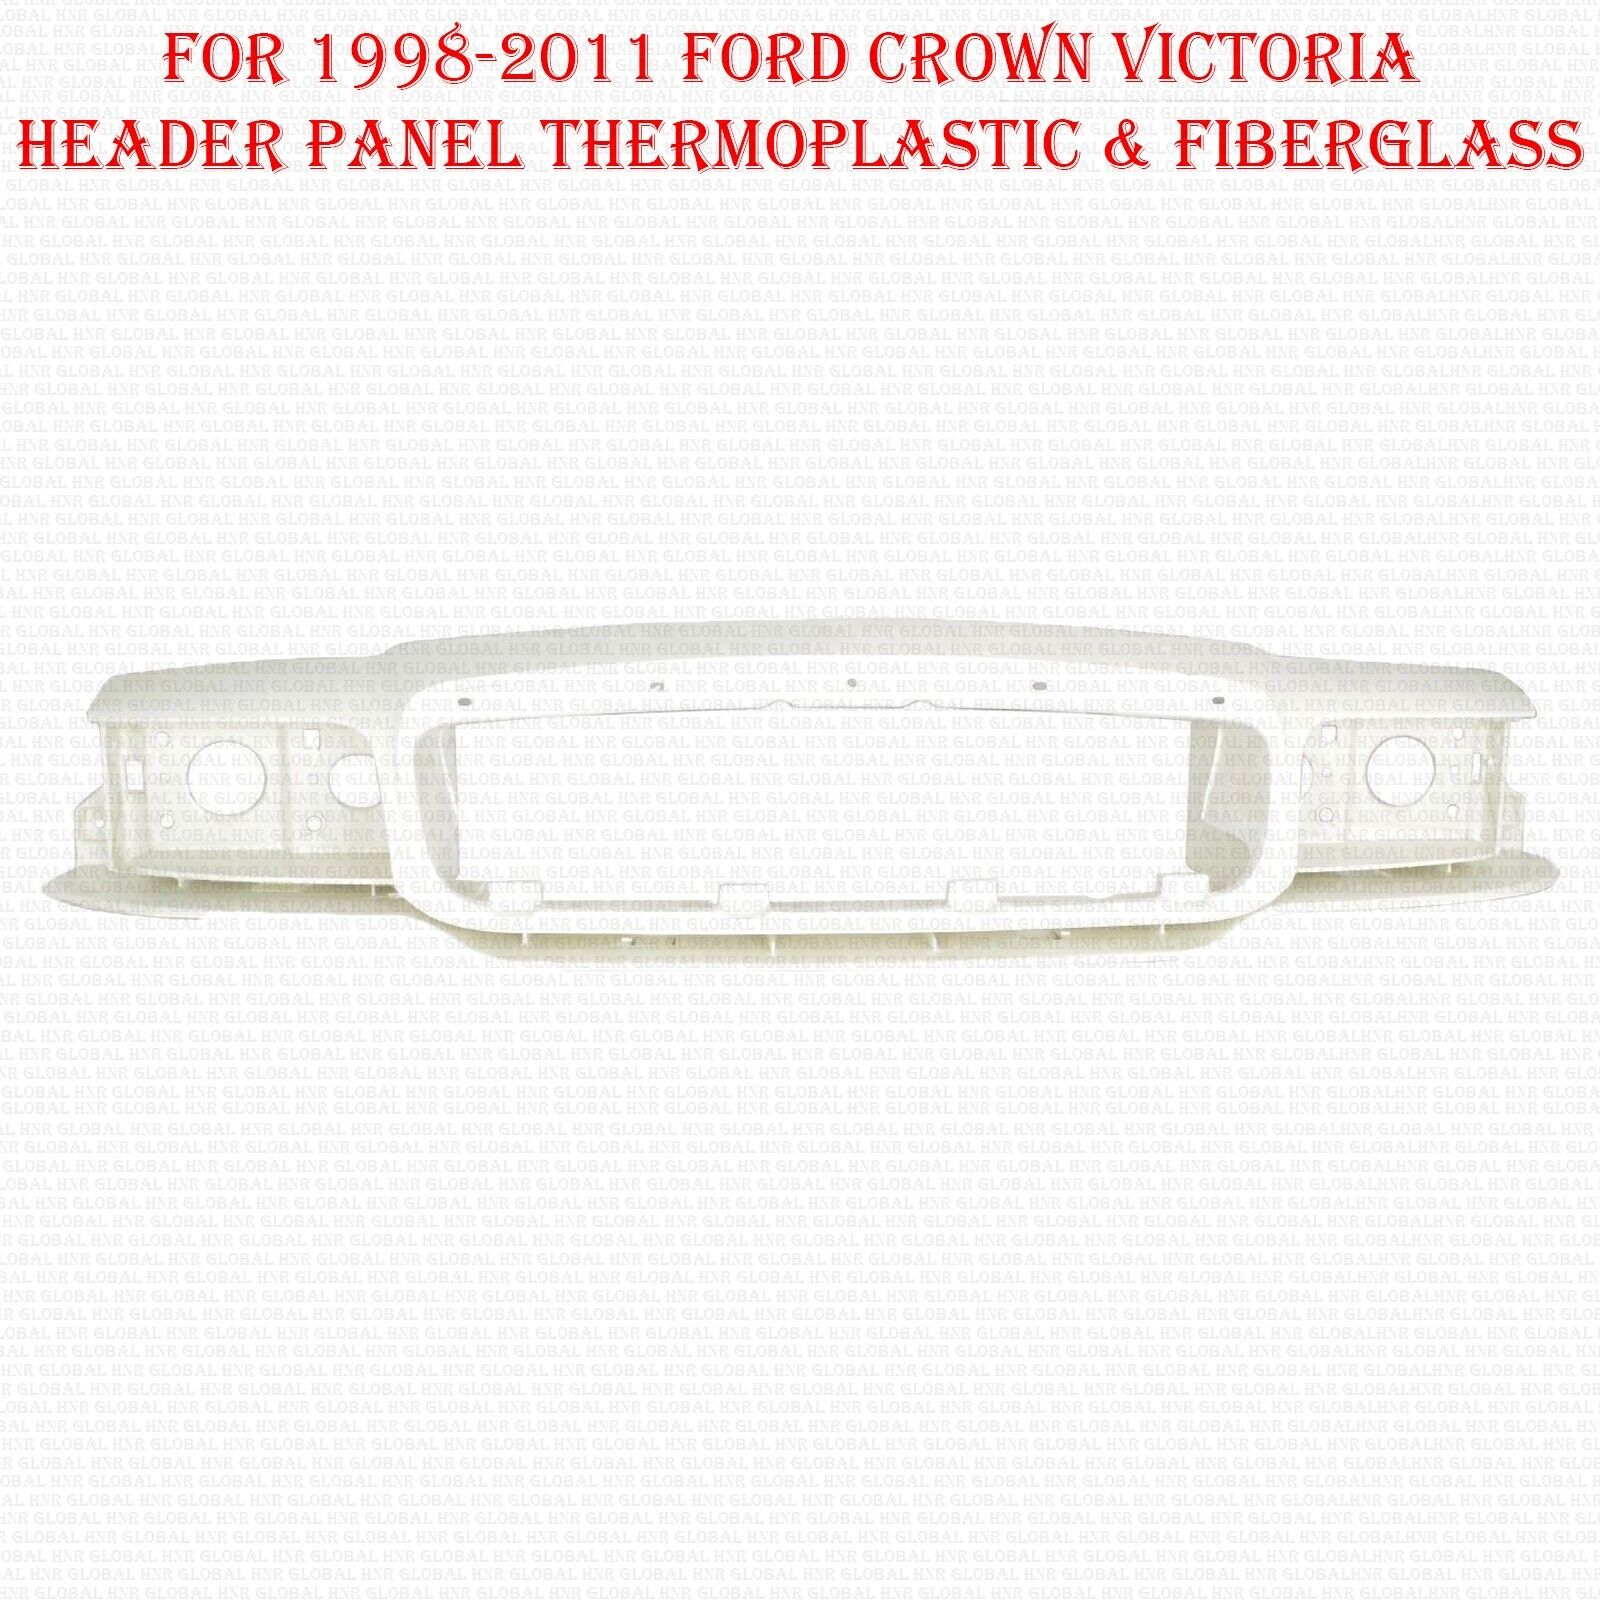 For 1998-2011 Ford Crown Victoria Header Panel Thermoplastic & Fiberglass